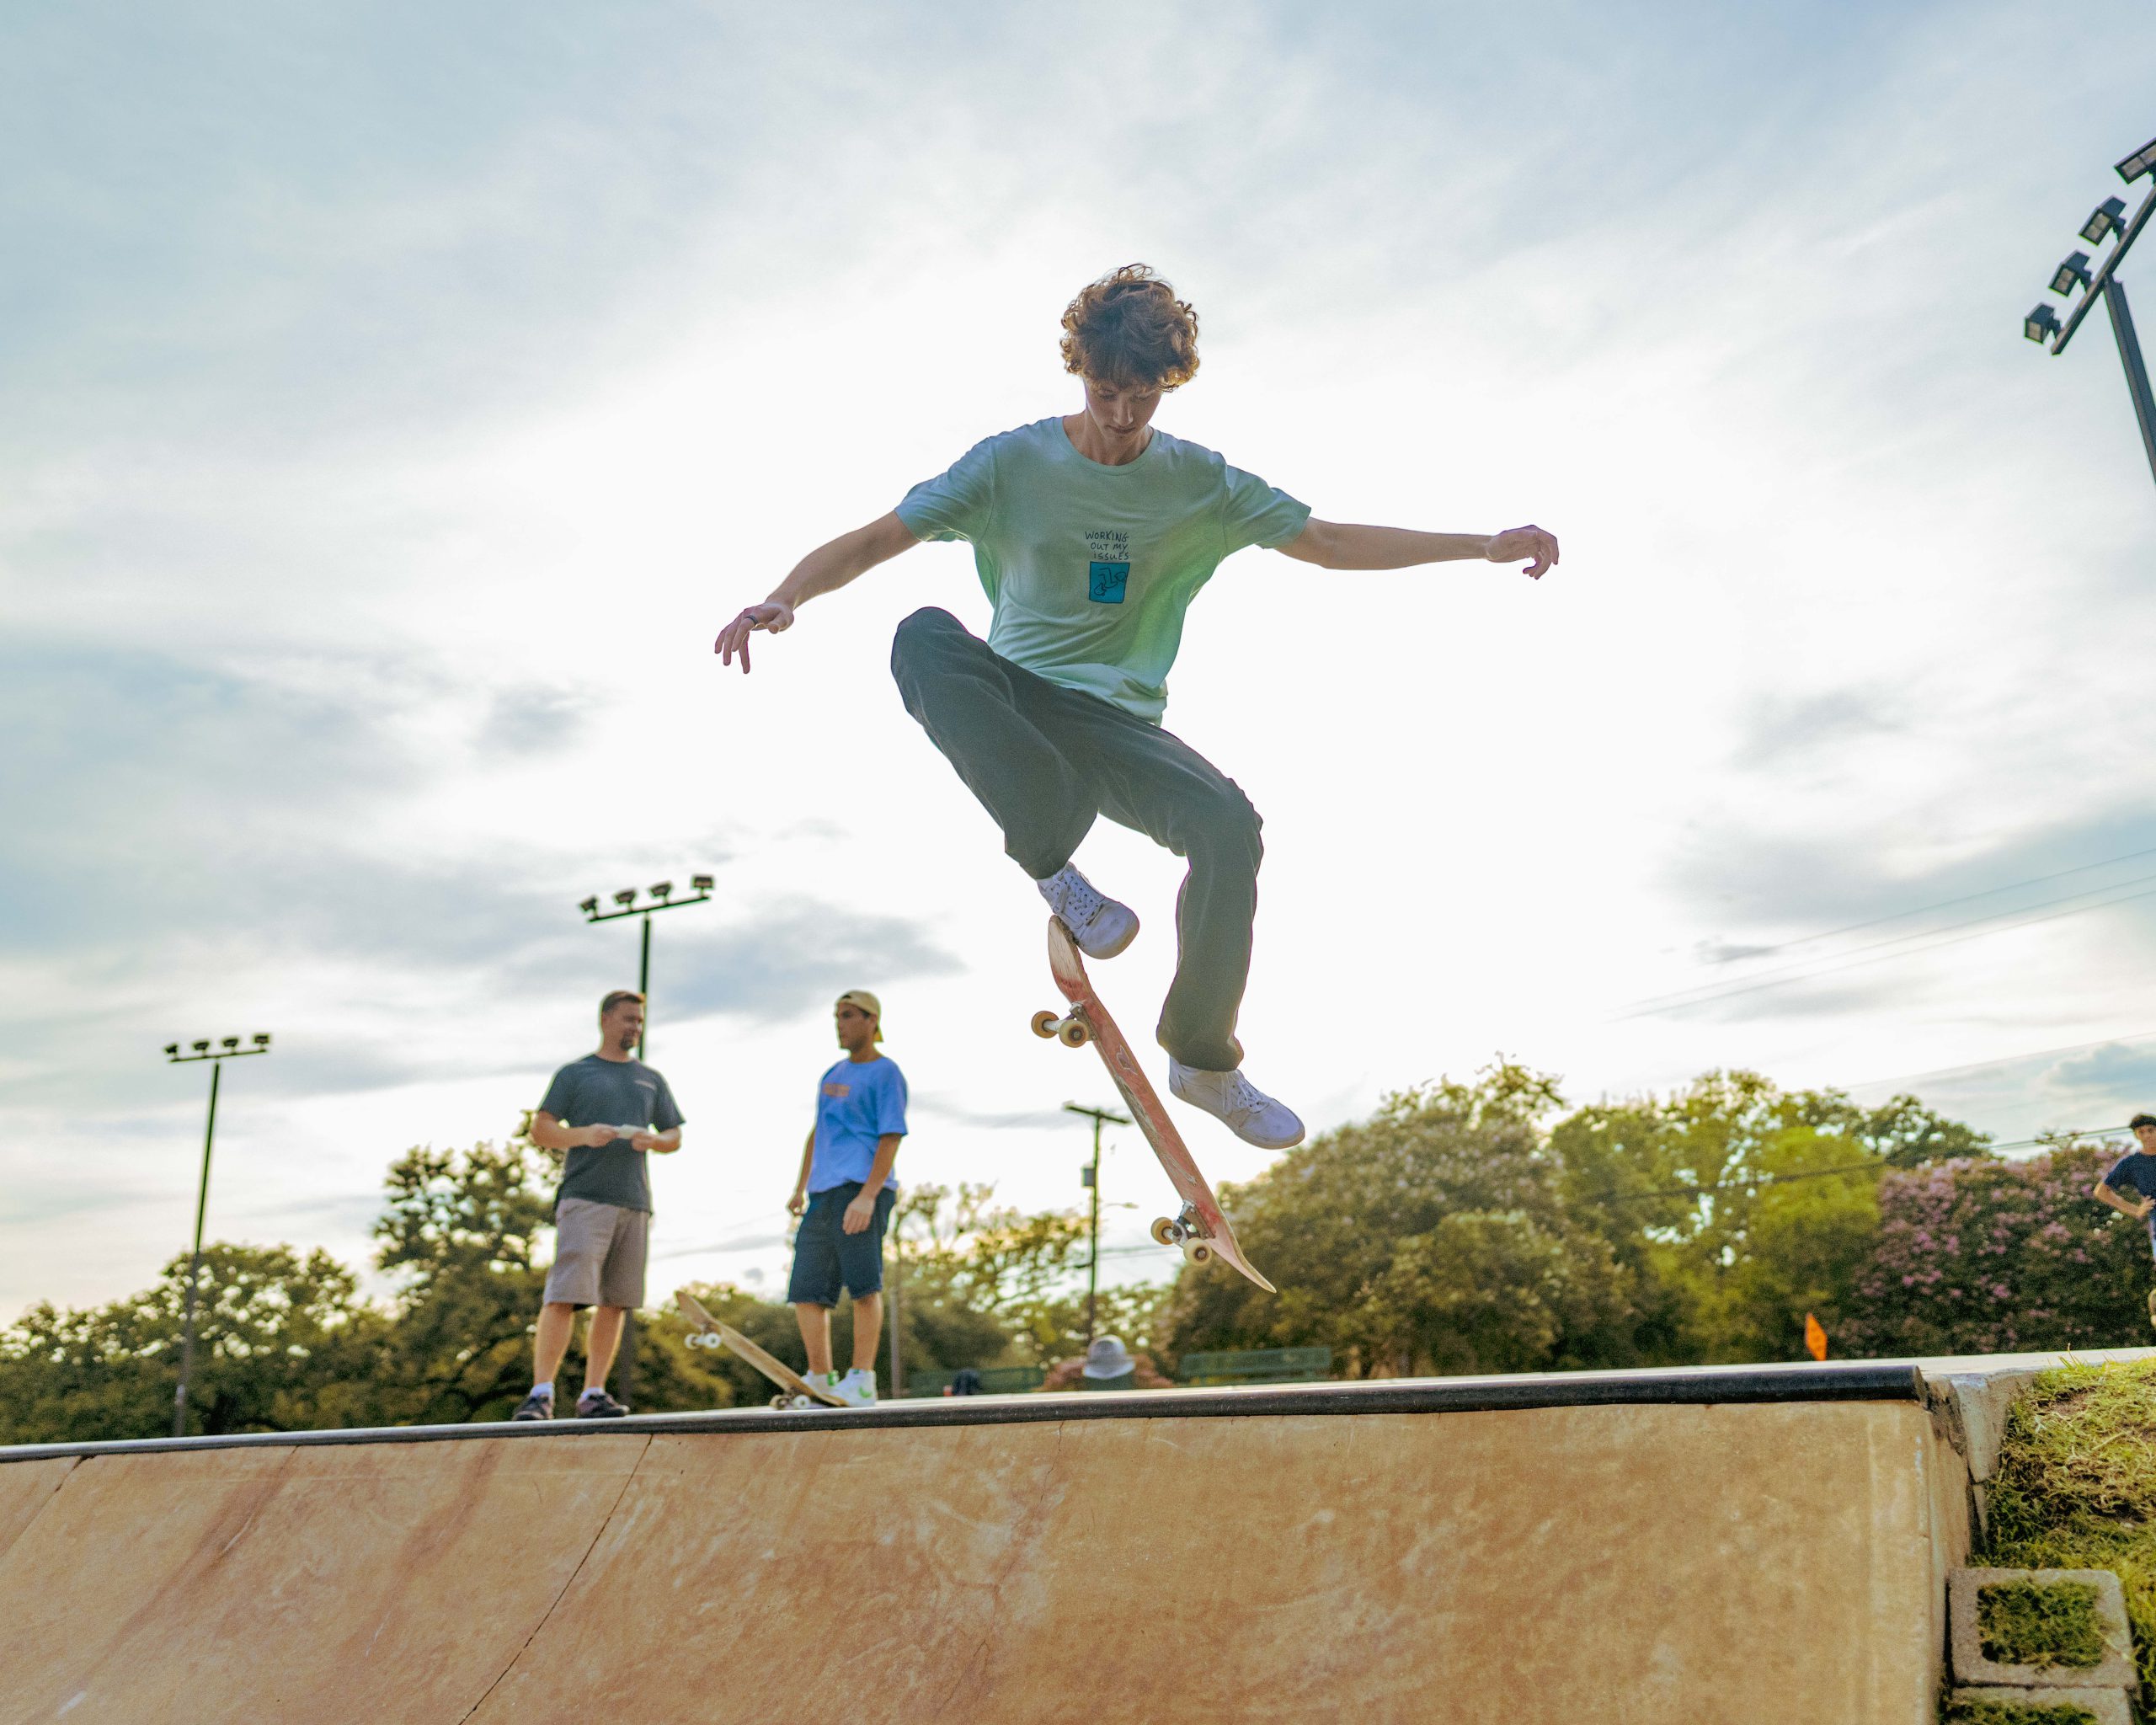 Photo of skateboarder doing a trick mid-air